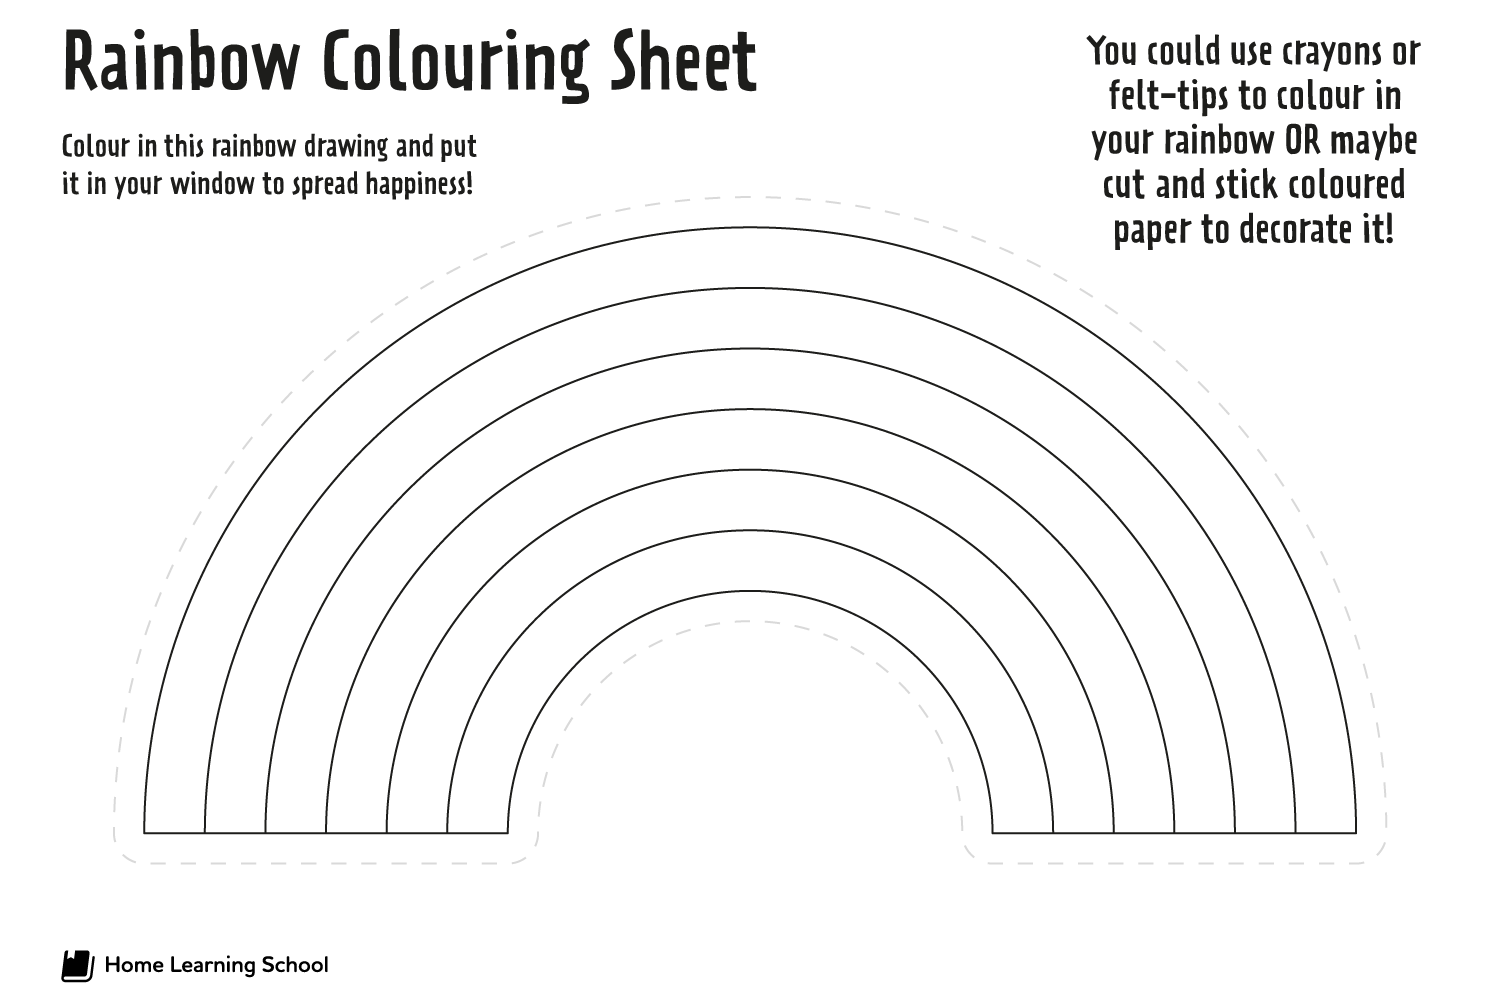 rainbow-colouring-sheet-home-learning-school